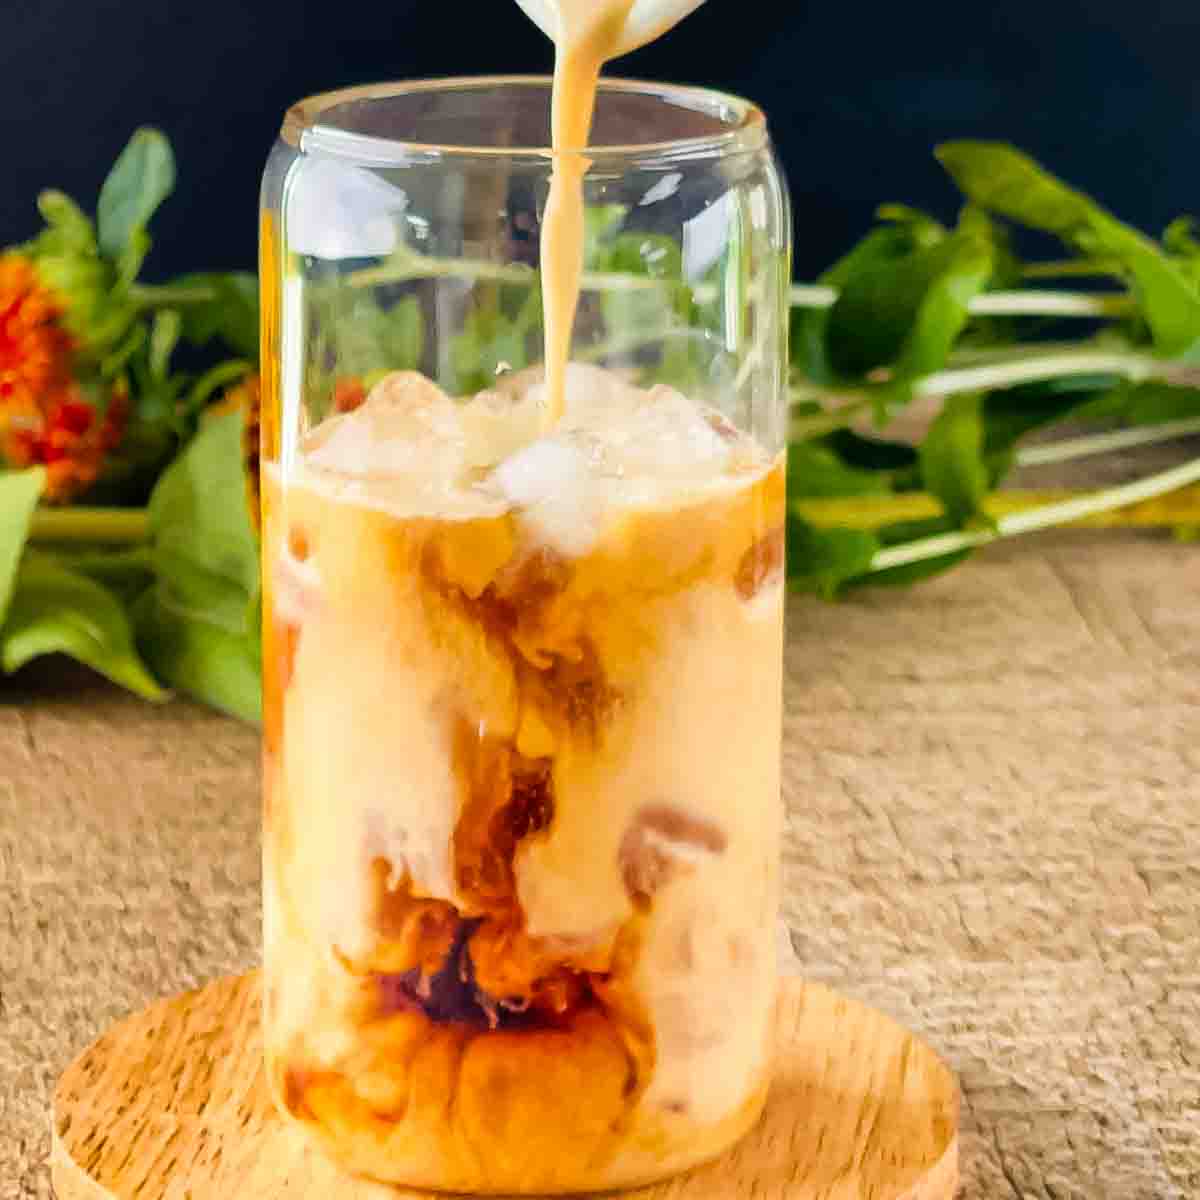 Pumpkin cream cold brew being poured into a tall glass.